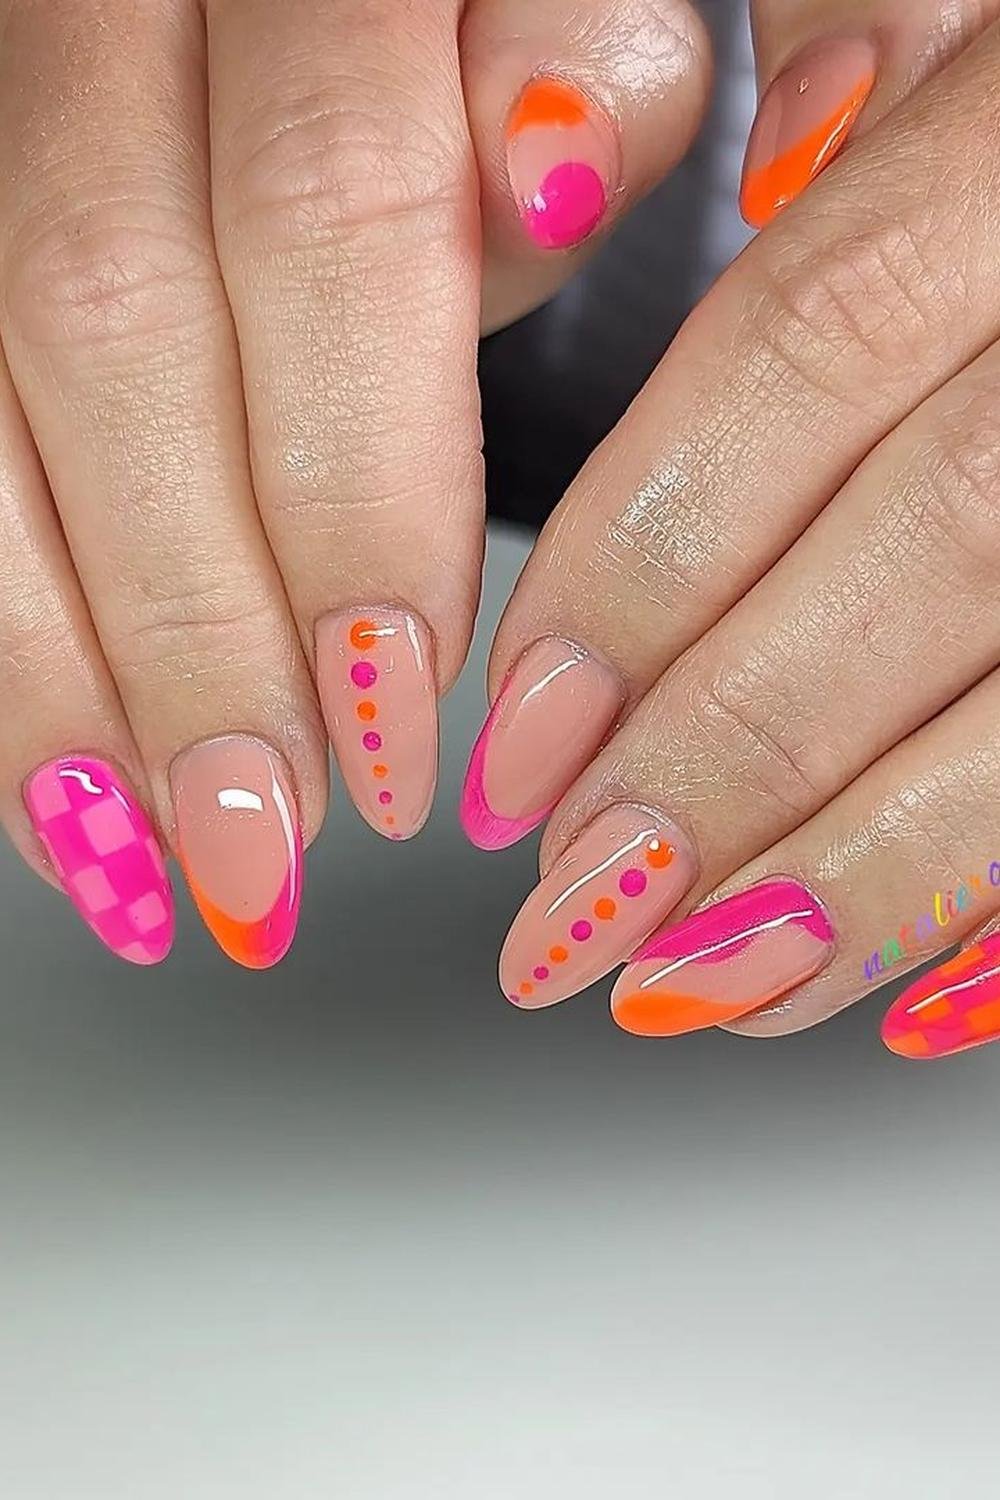 38 - Picture of Pink and Orange Nails